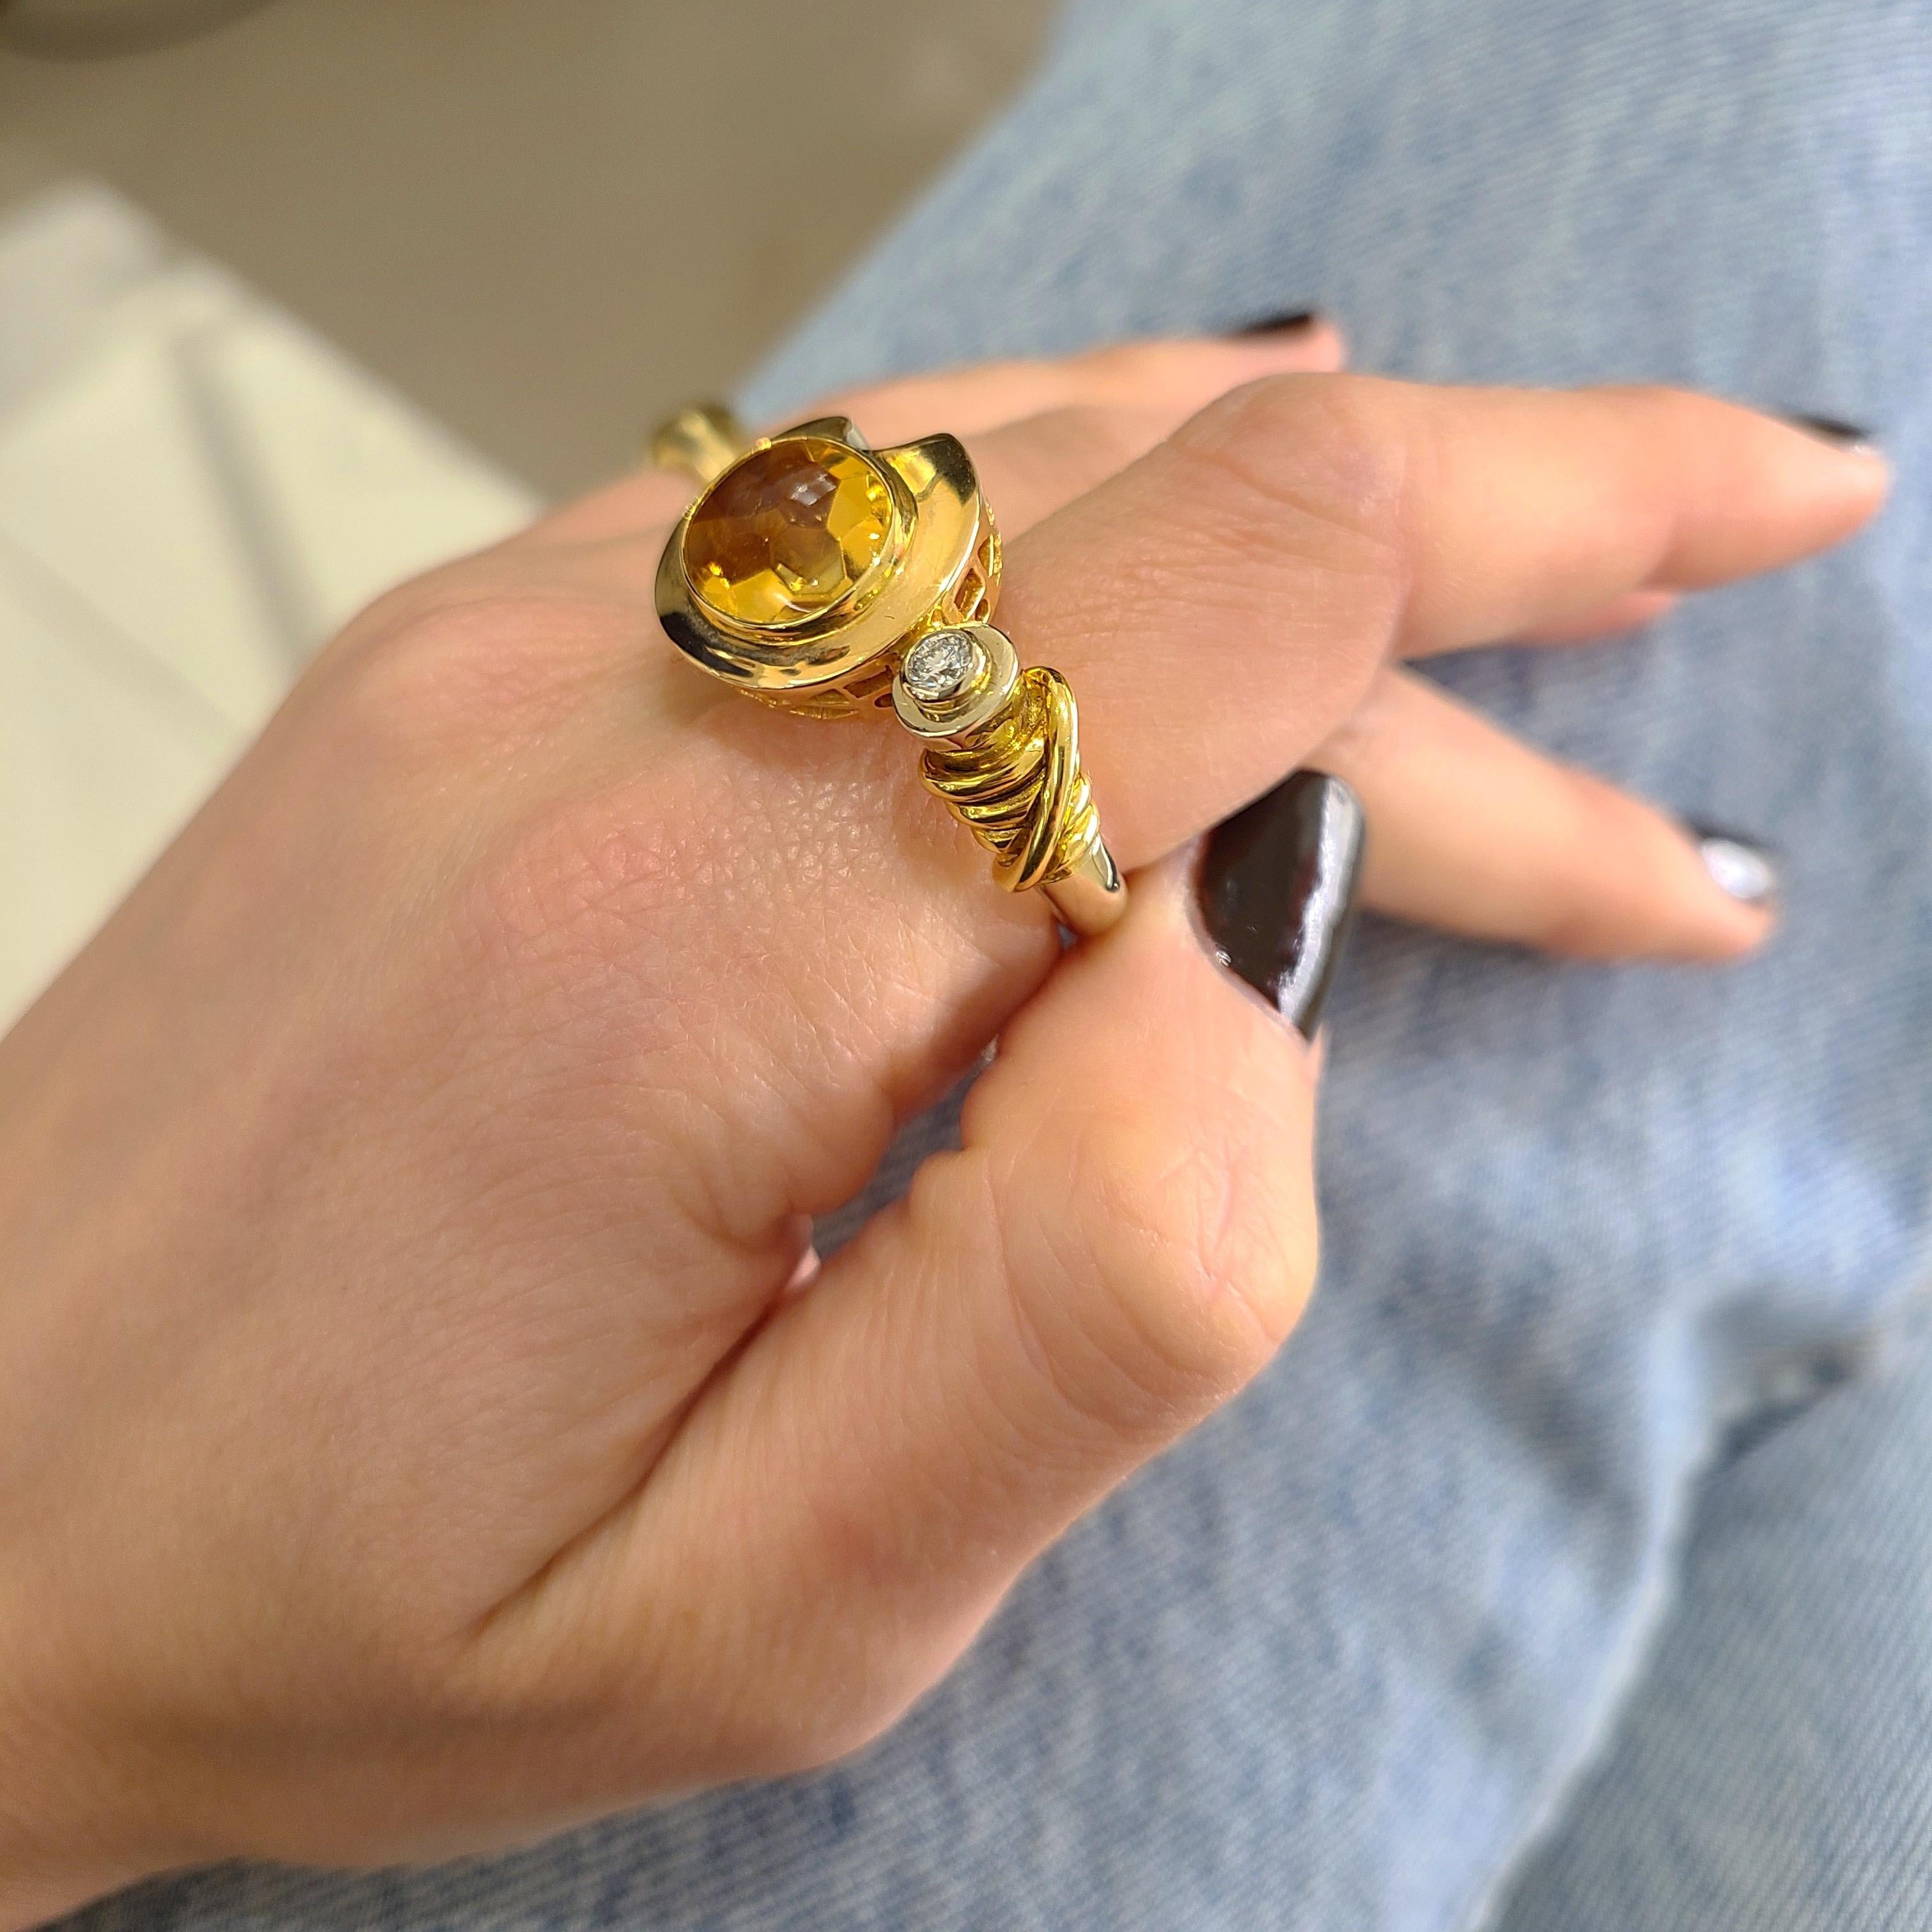 Modern La Nouvelle Bague 18 Karat Gold Ring with Oval Citrine and Diamond Ring